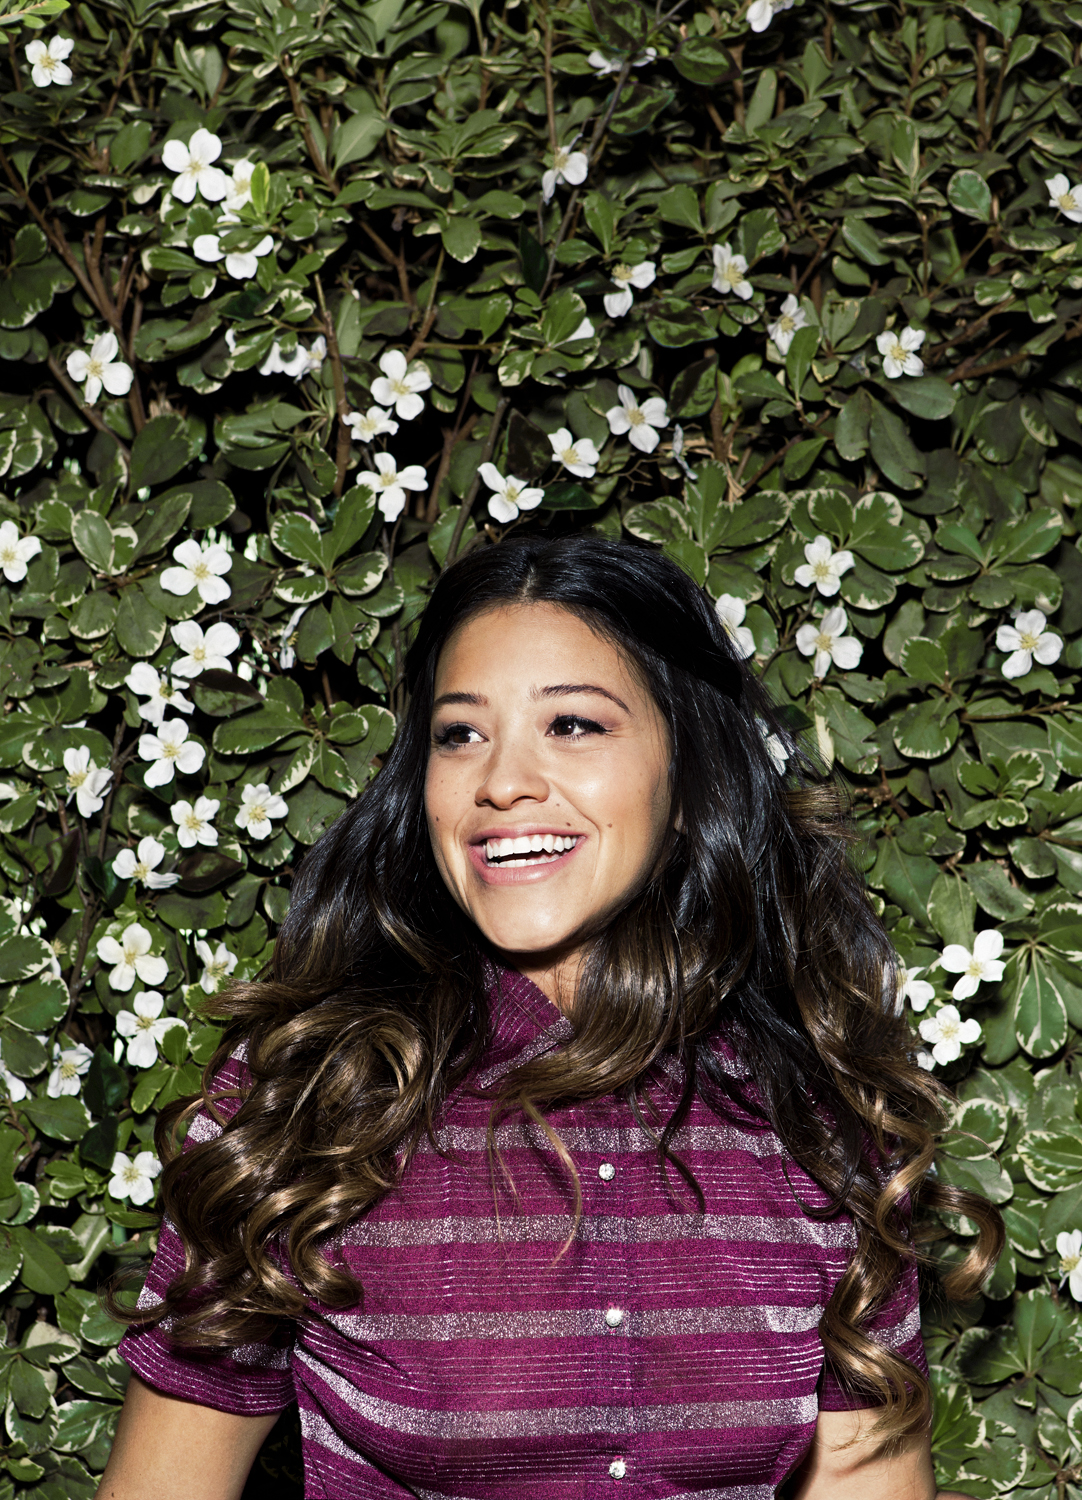 Gina Rodriguez, photographed in Los Angeles on October 3, 2014. (Ramona Rosales for TIME)